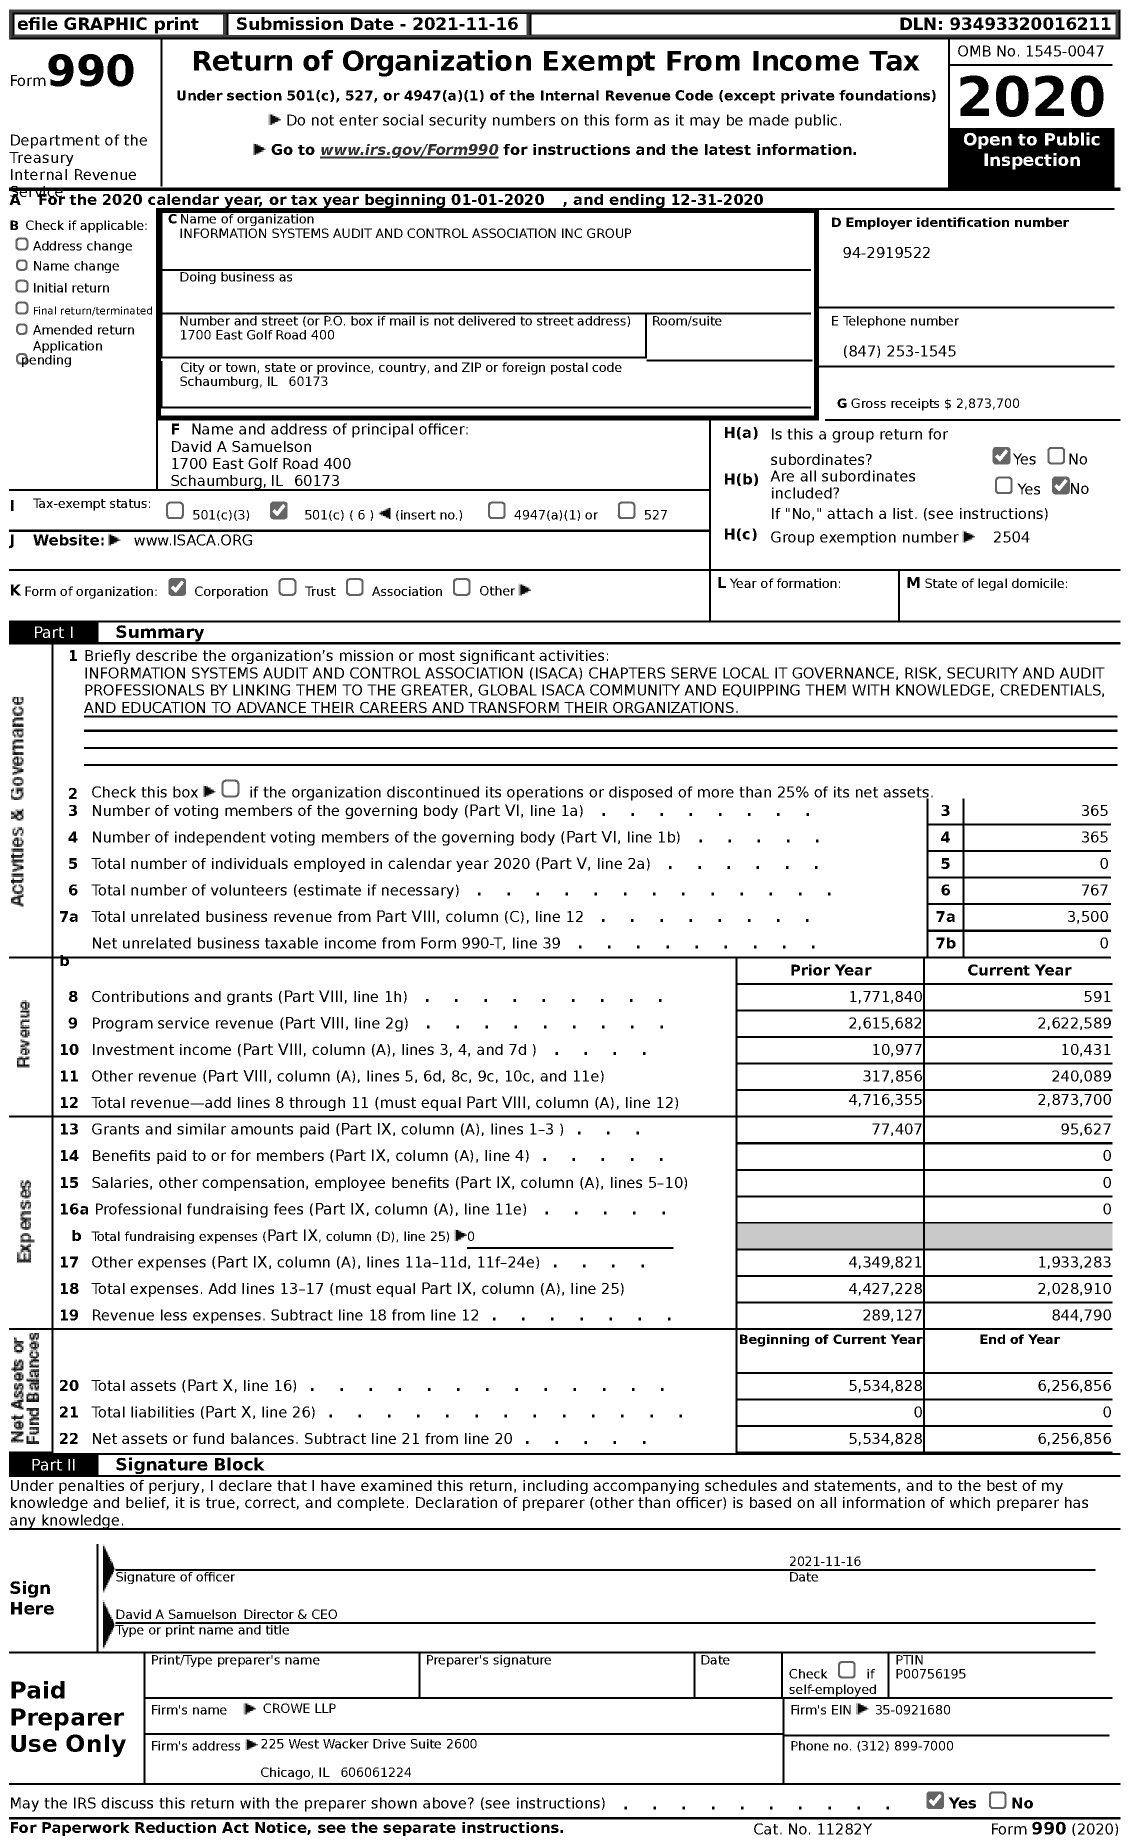 Image of first page of 2020 Form 990 for Information Systems Audit and Control Association Group (ISACA)